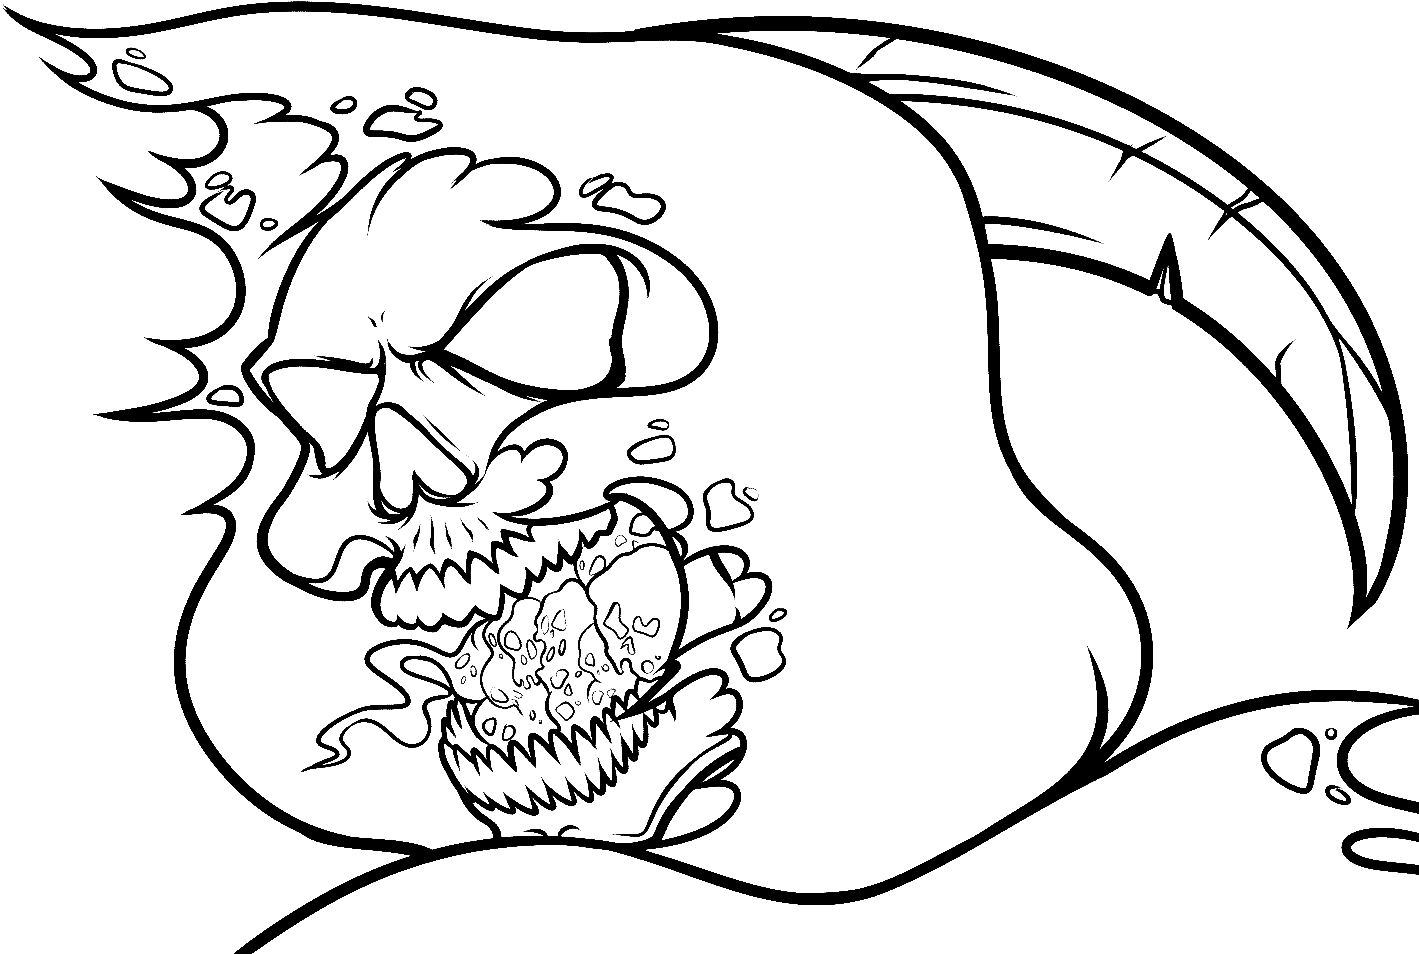 Free Skull to Print Coloring Page